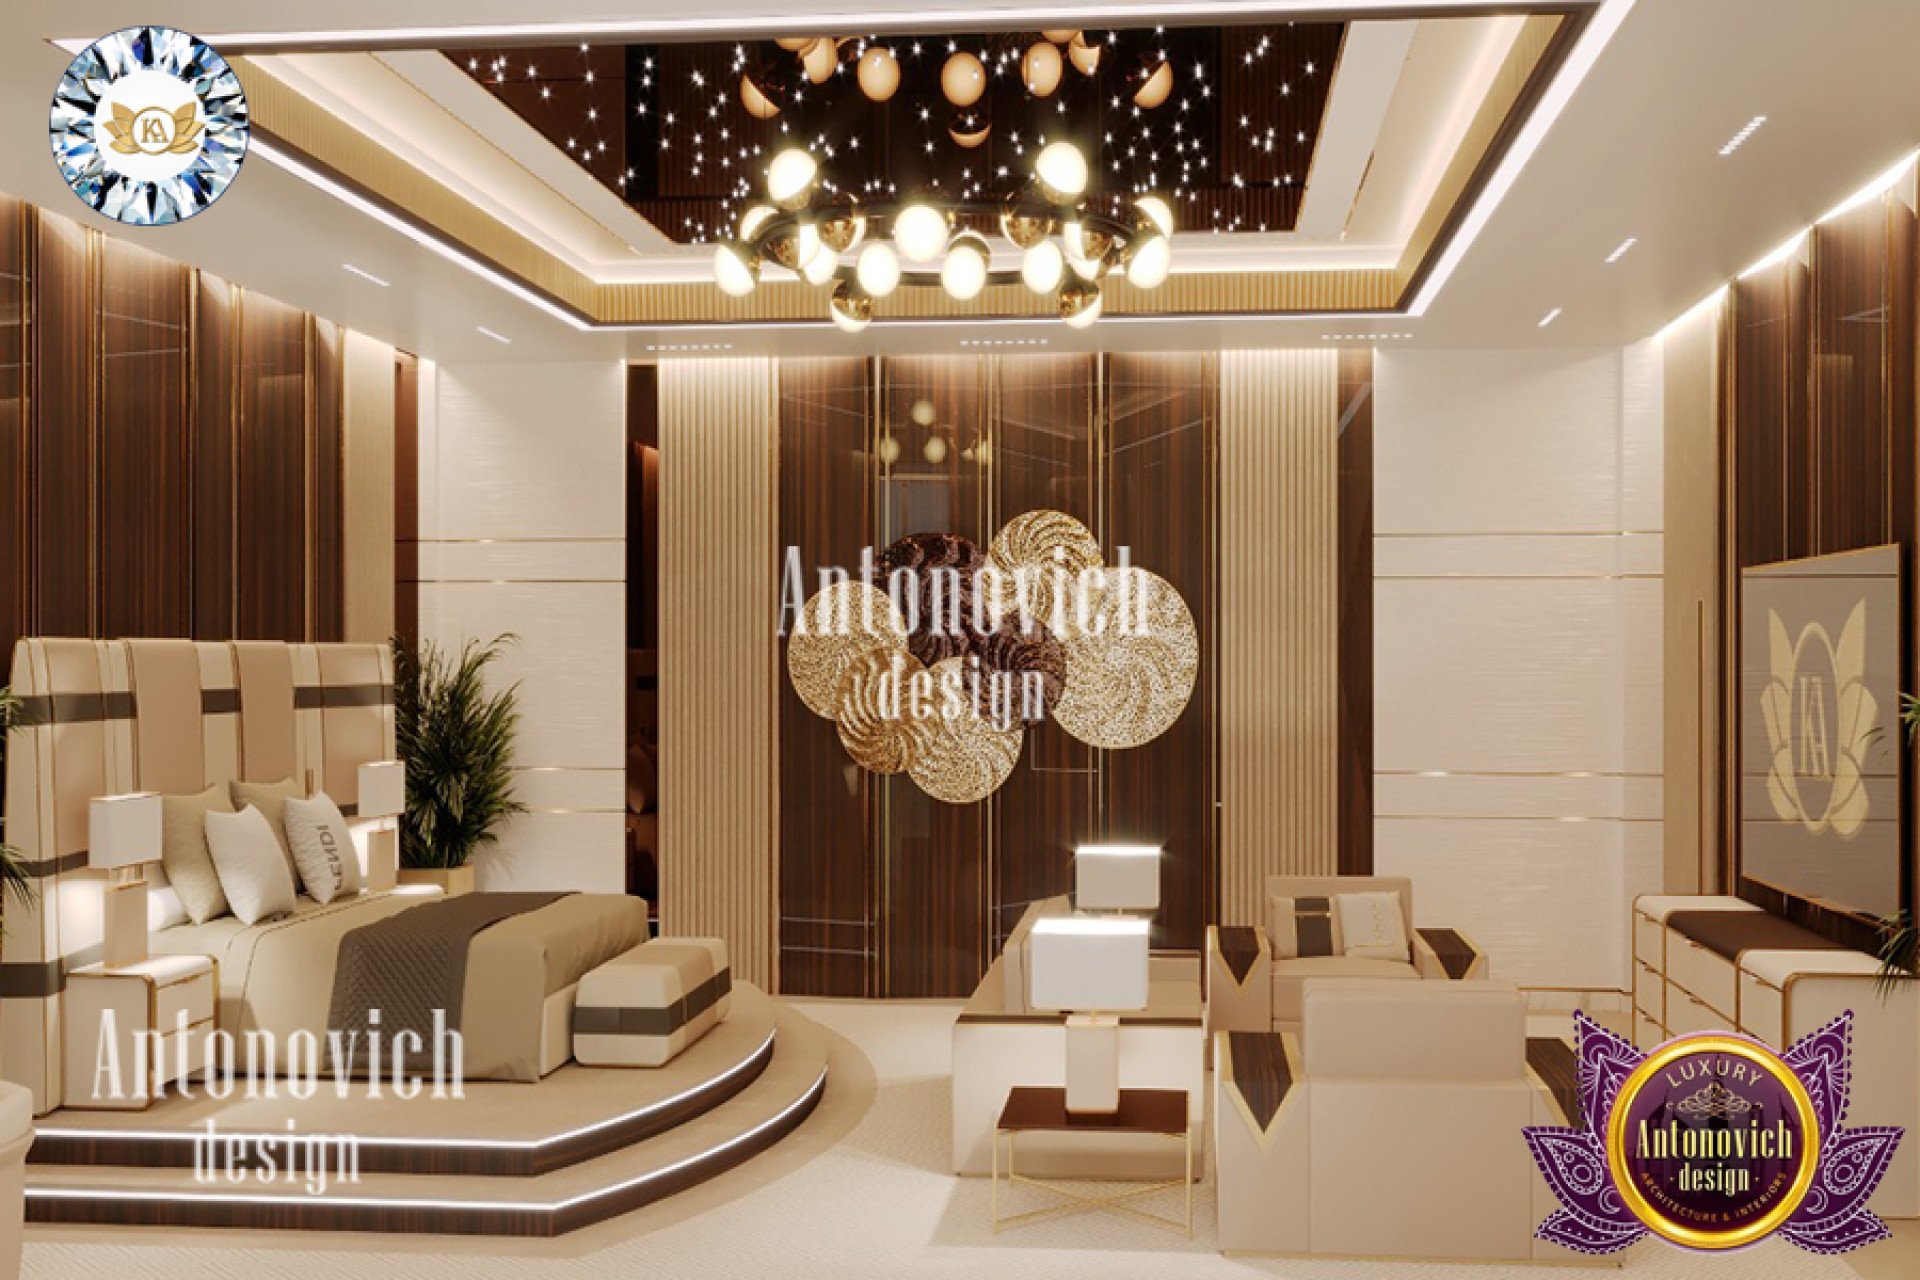 WORLD-CLASS INTERIOR DESIGN SERVICES FOR LUXURY BEDROOMS 